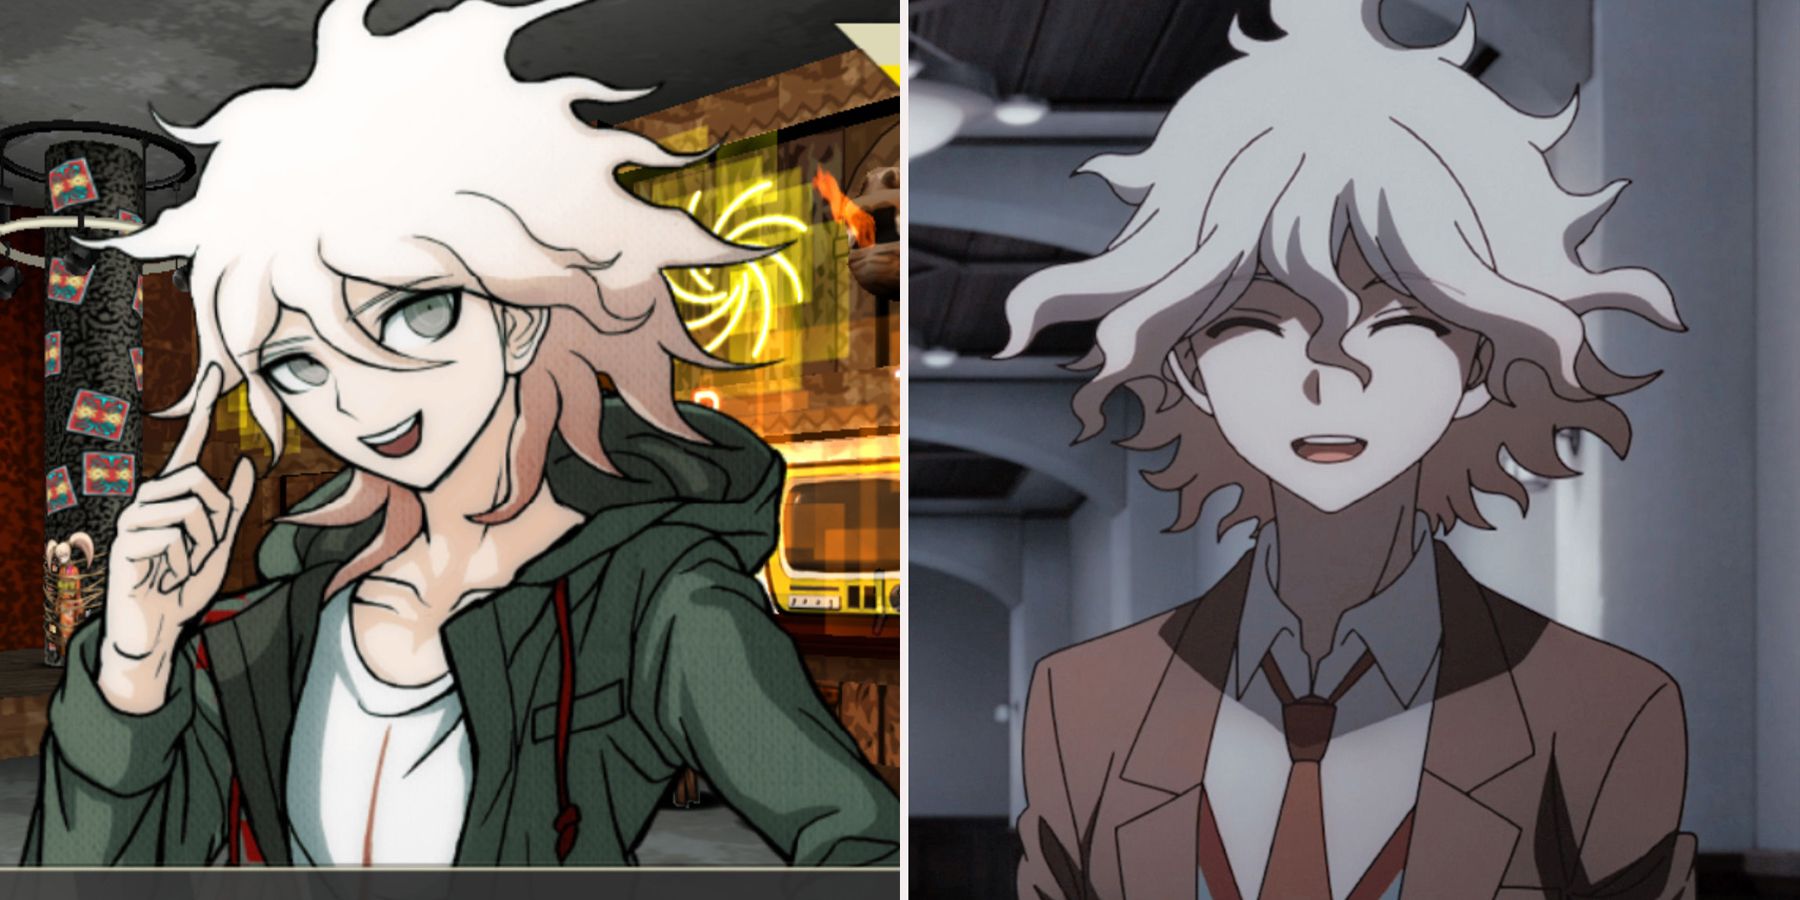 Danganronpa 7 Things You Didn't Know About Nagito Komaeda featured image